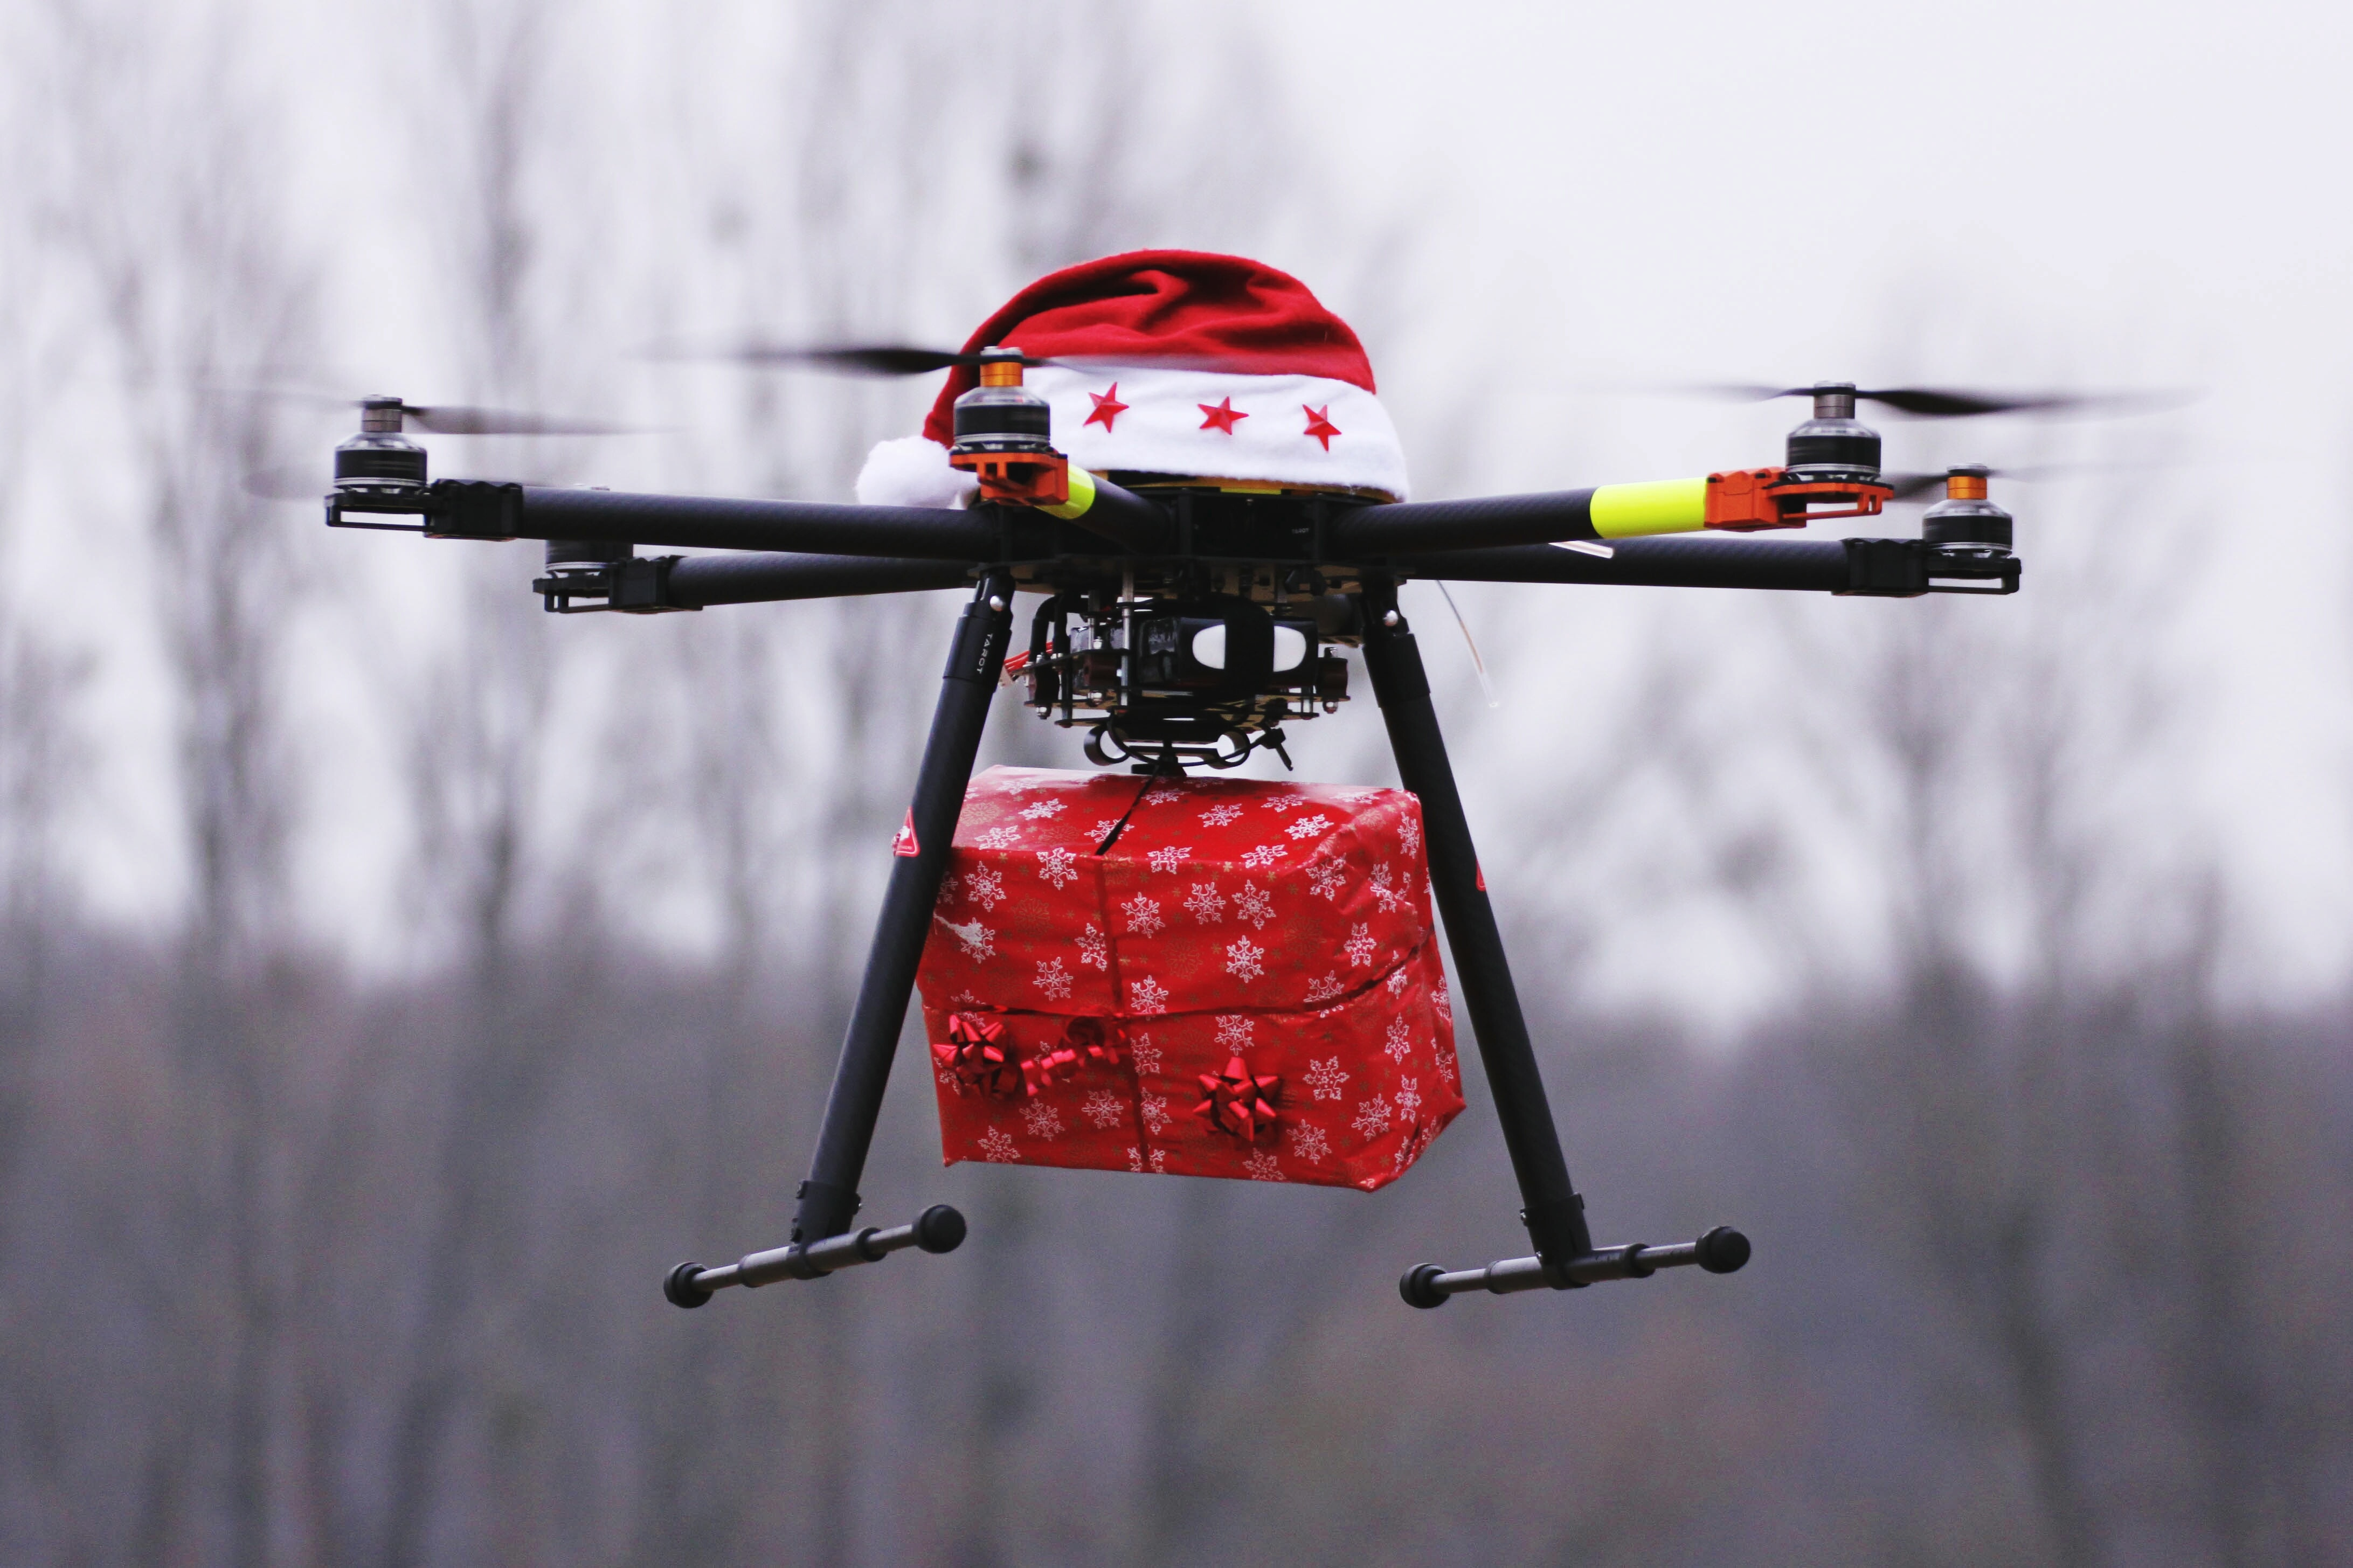 Giving Someone a Drone for Christmas? They May Need Insurance